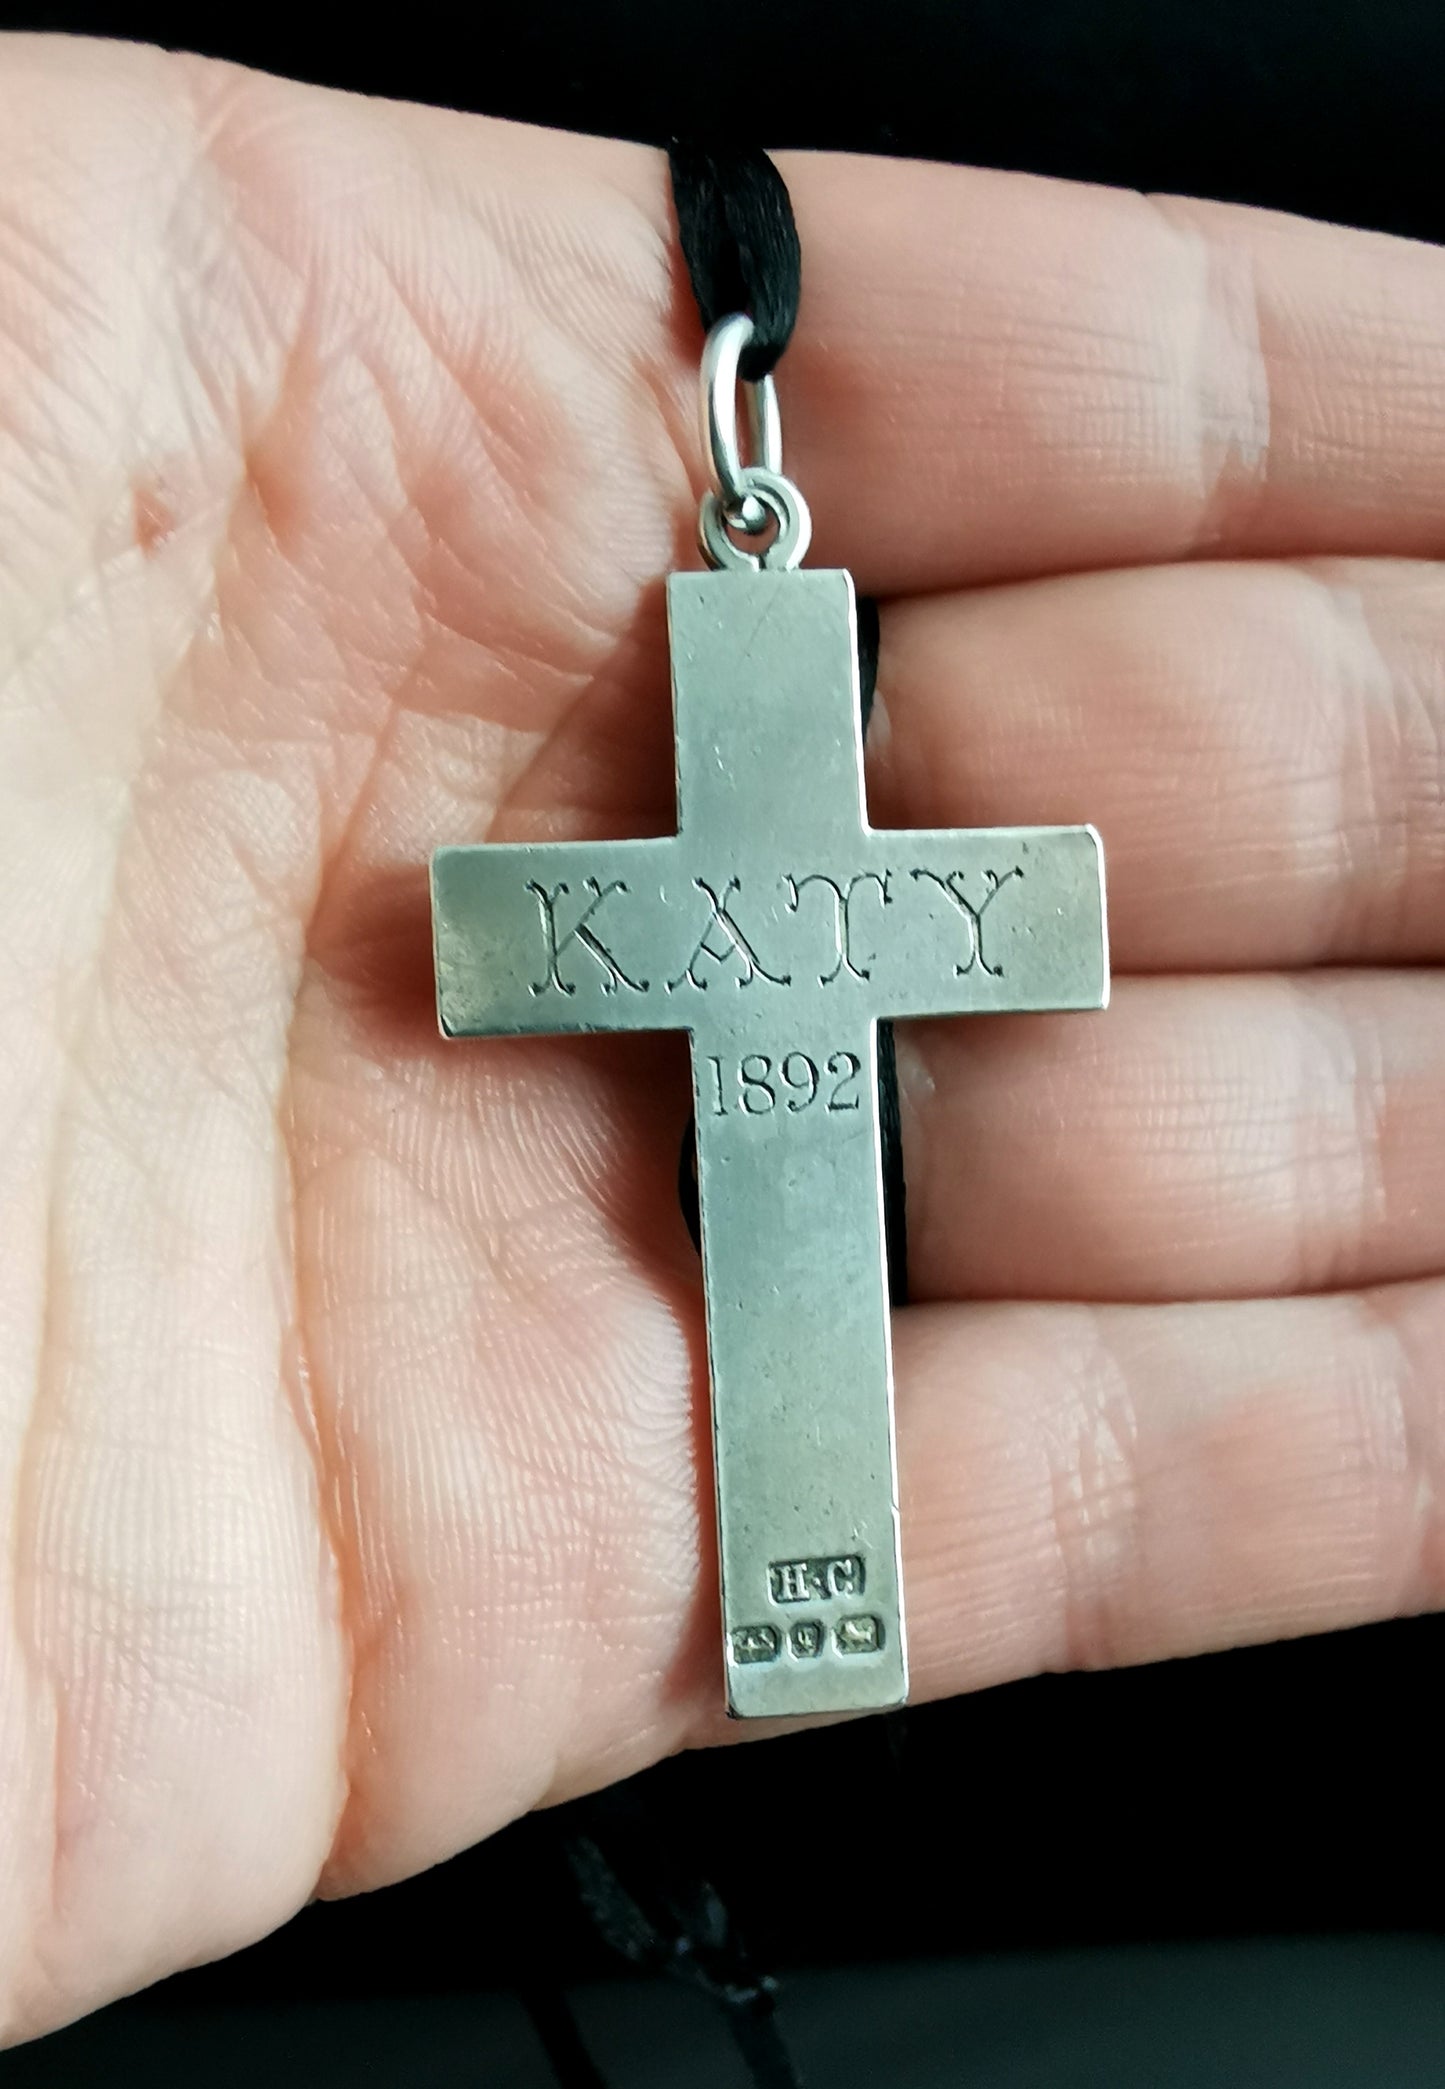 Antique Victorian silver cross pendant, mourning